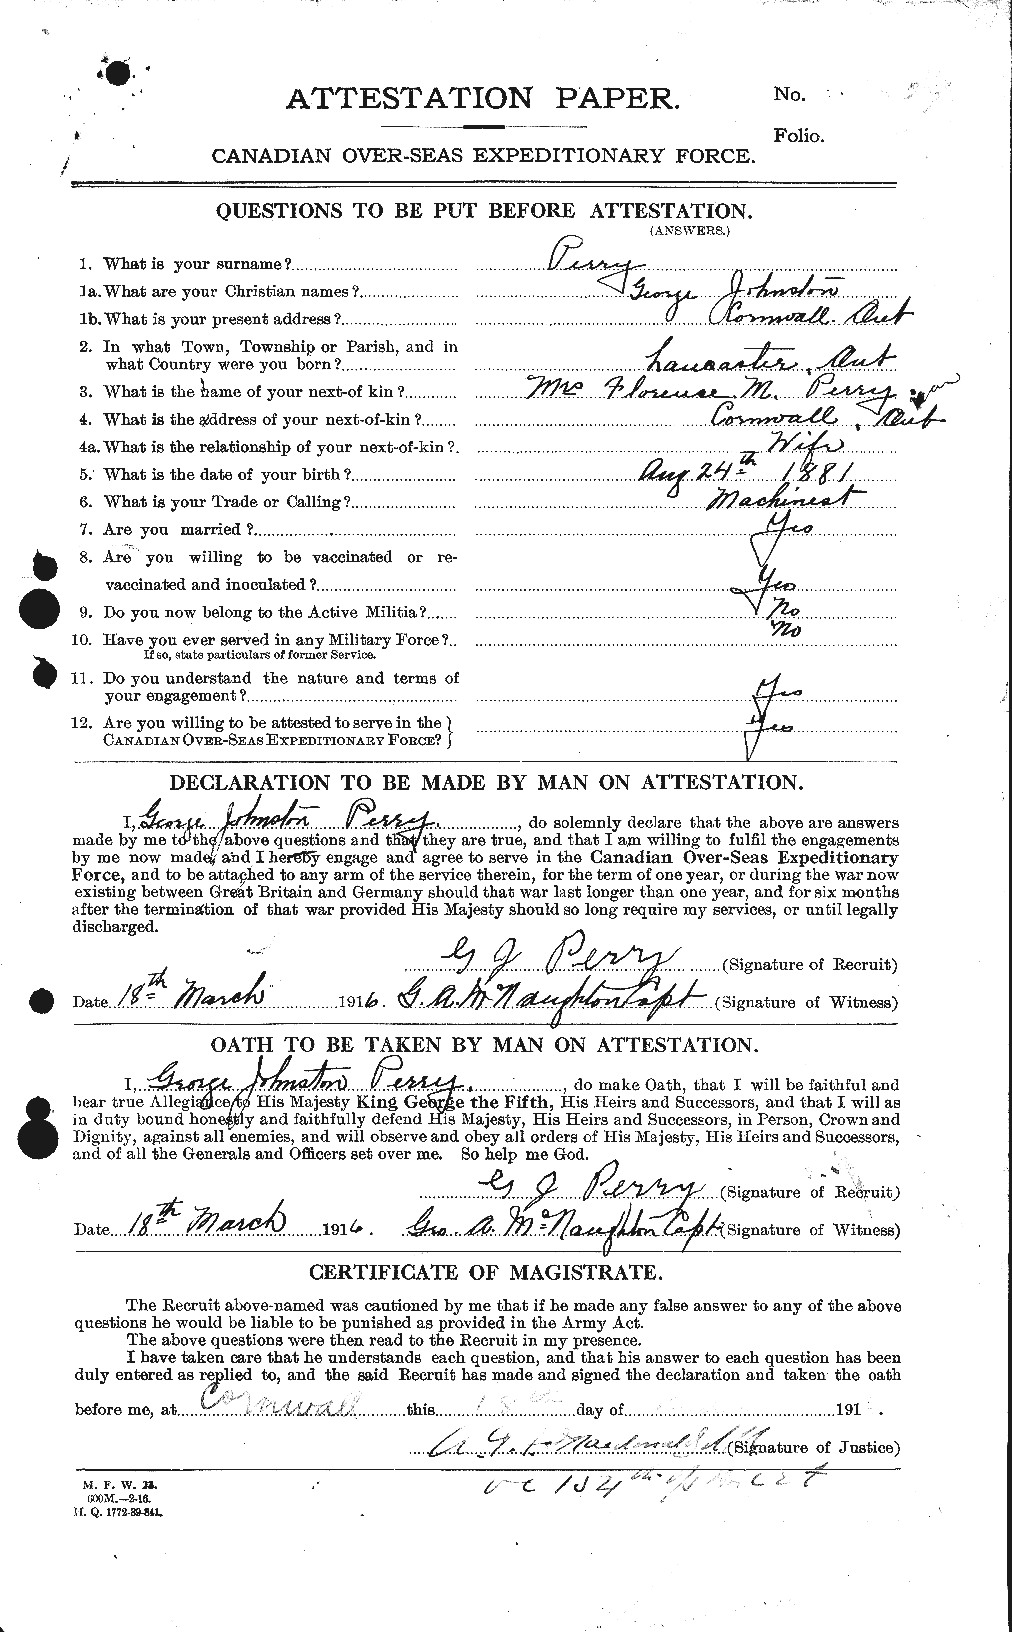 Personnel Records of the First World War - CEF 574862a